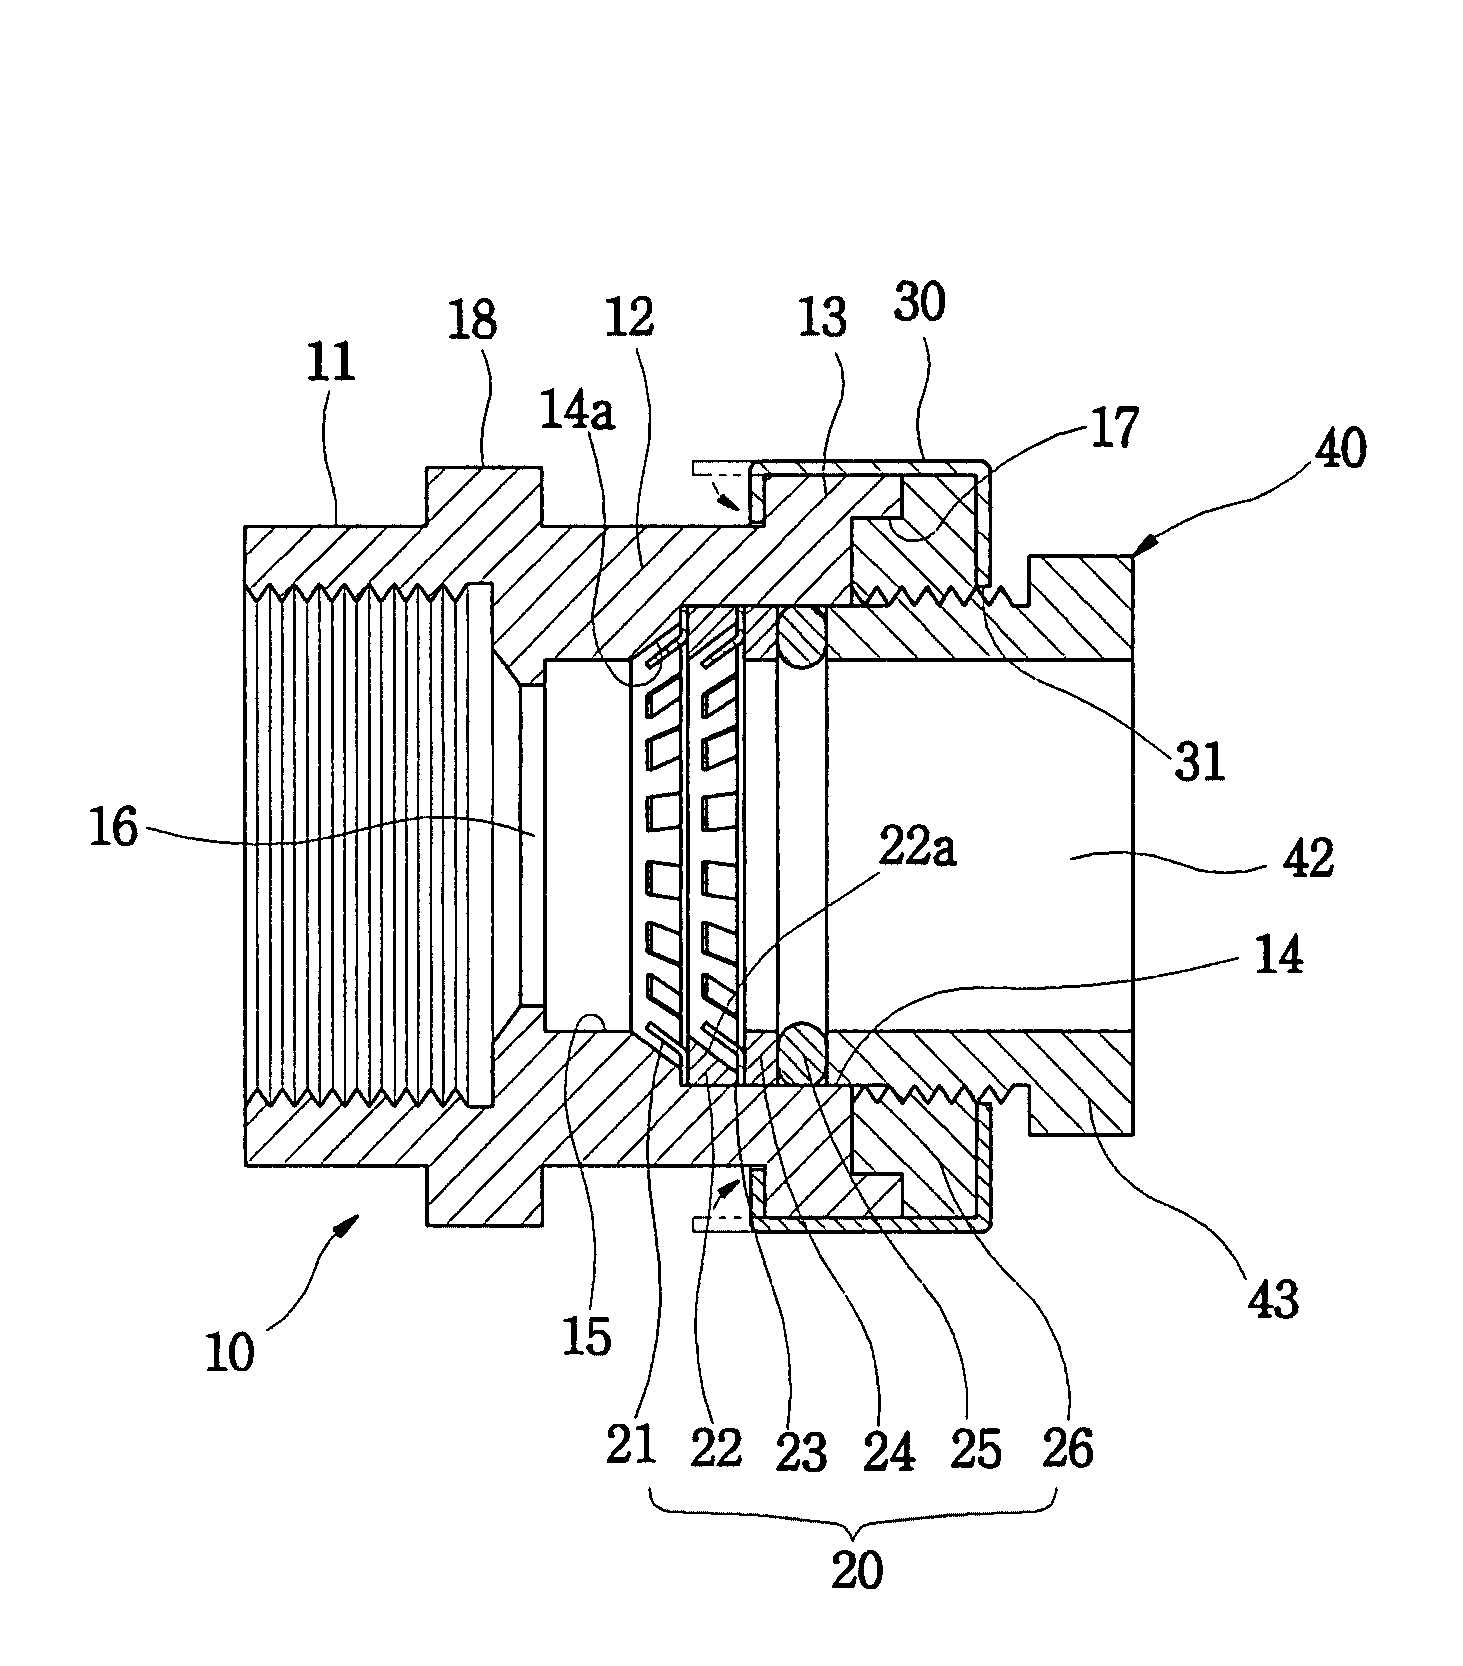 Coupling device for circular pipes